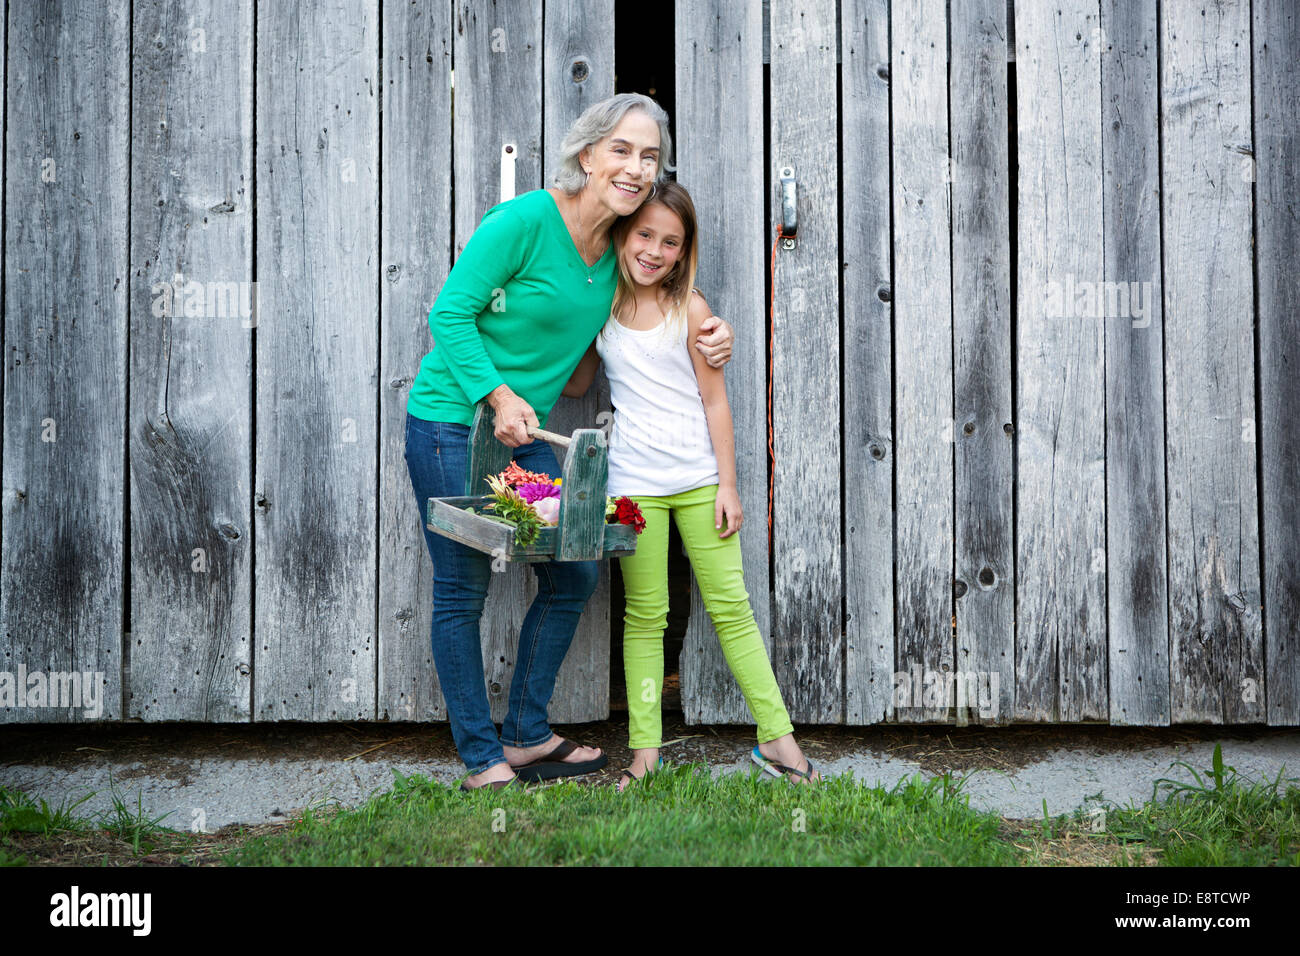 Caucasian grandmother and granddaughter smiling on farm Stock Photo